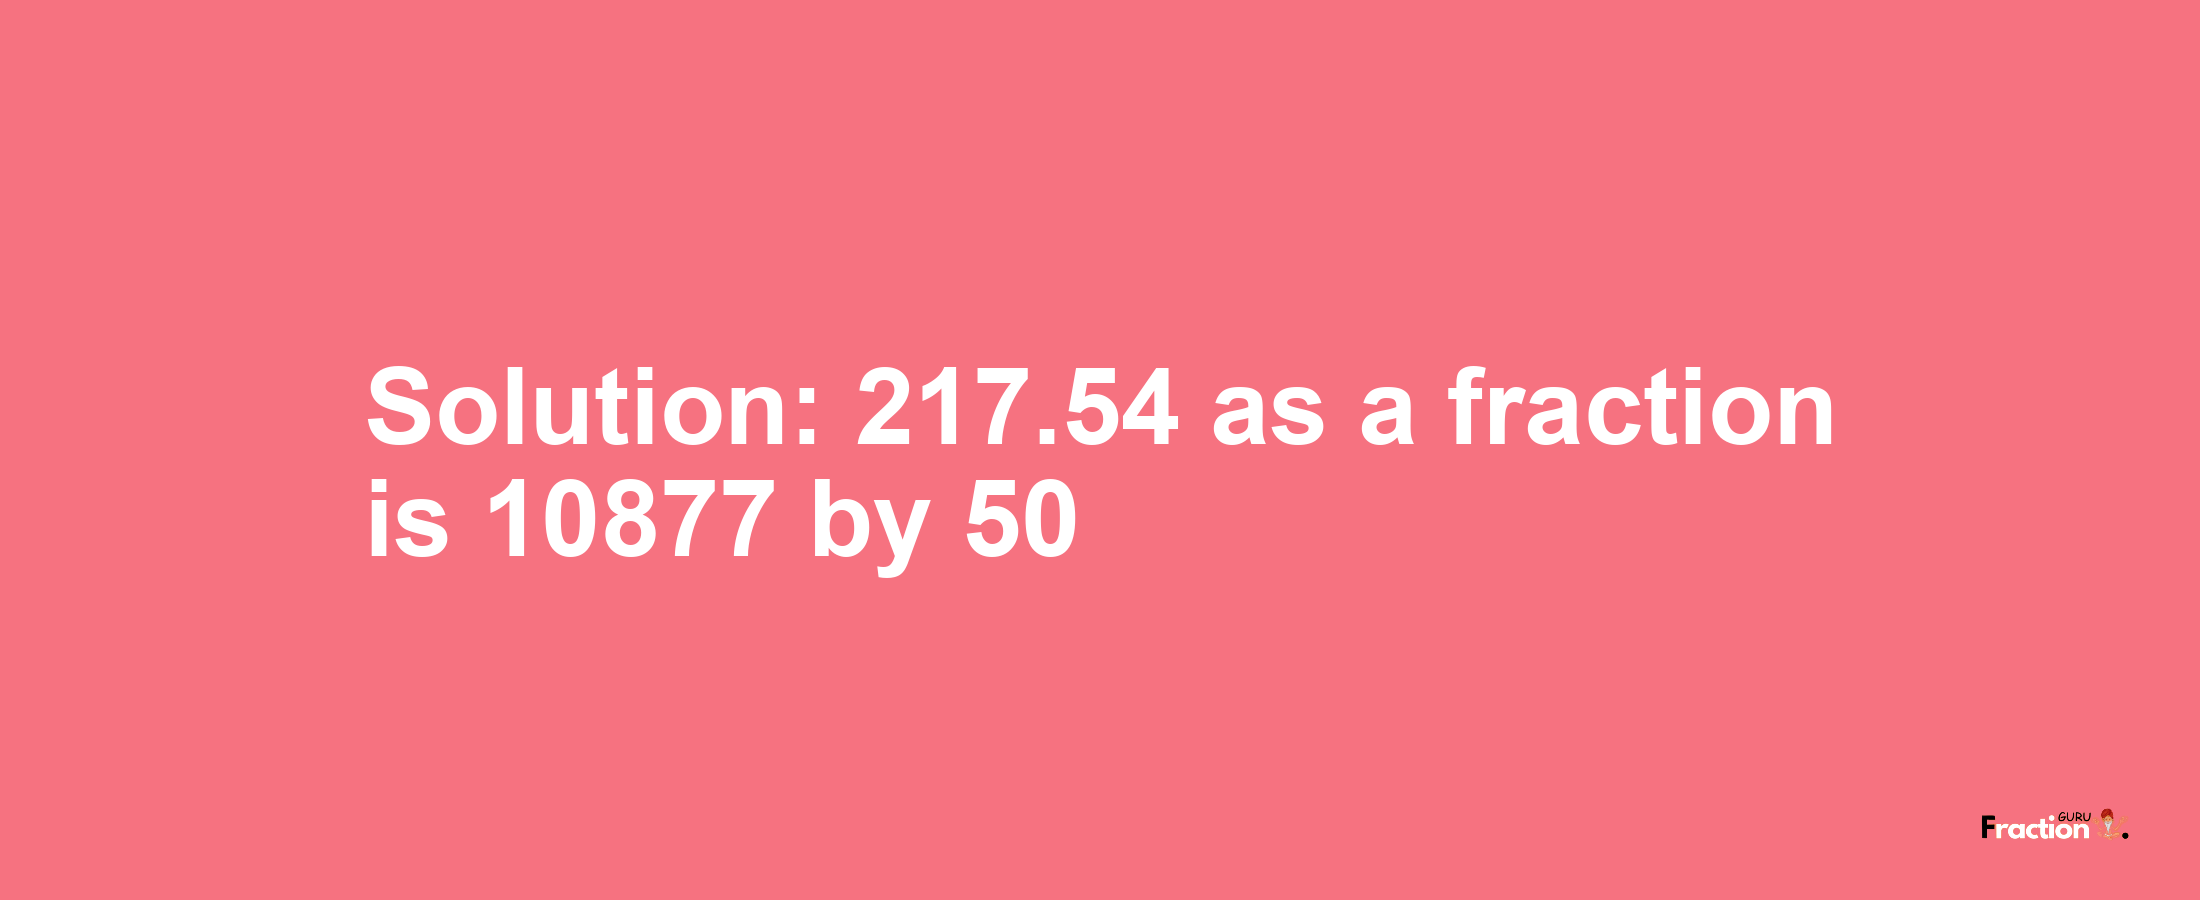 Solution:217.54 as a fraction is 10877/50